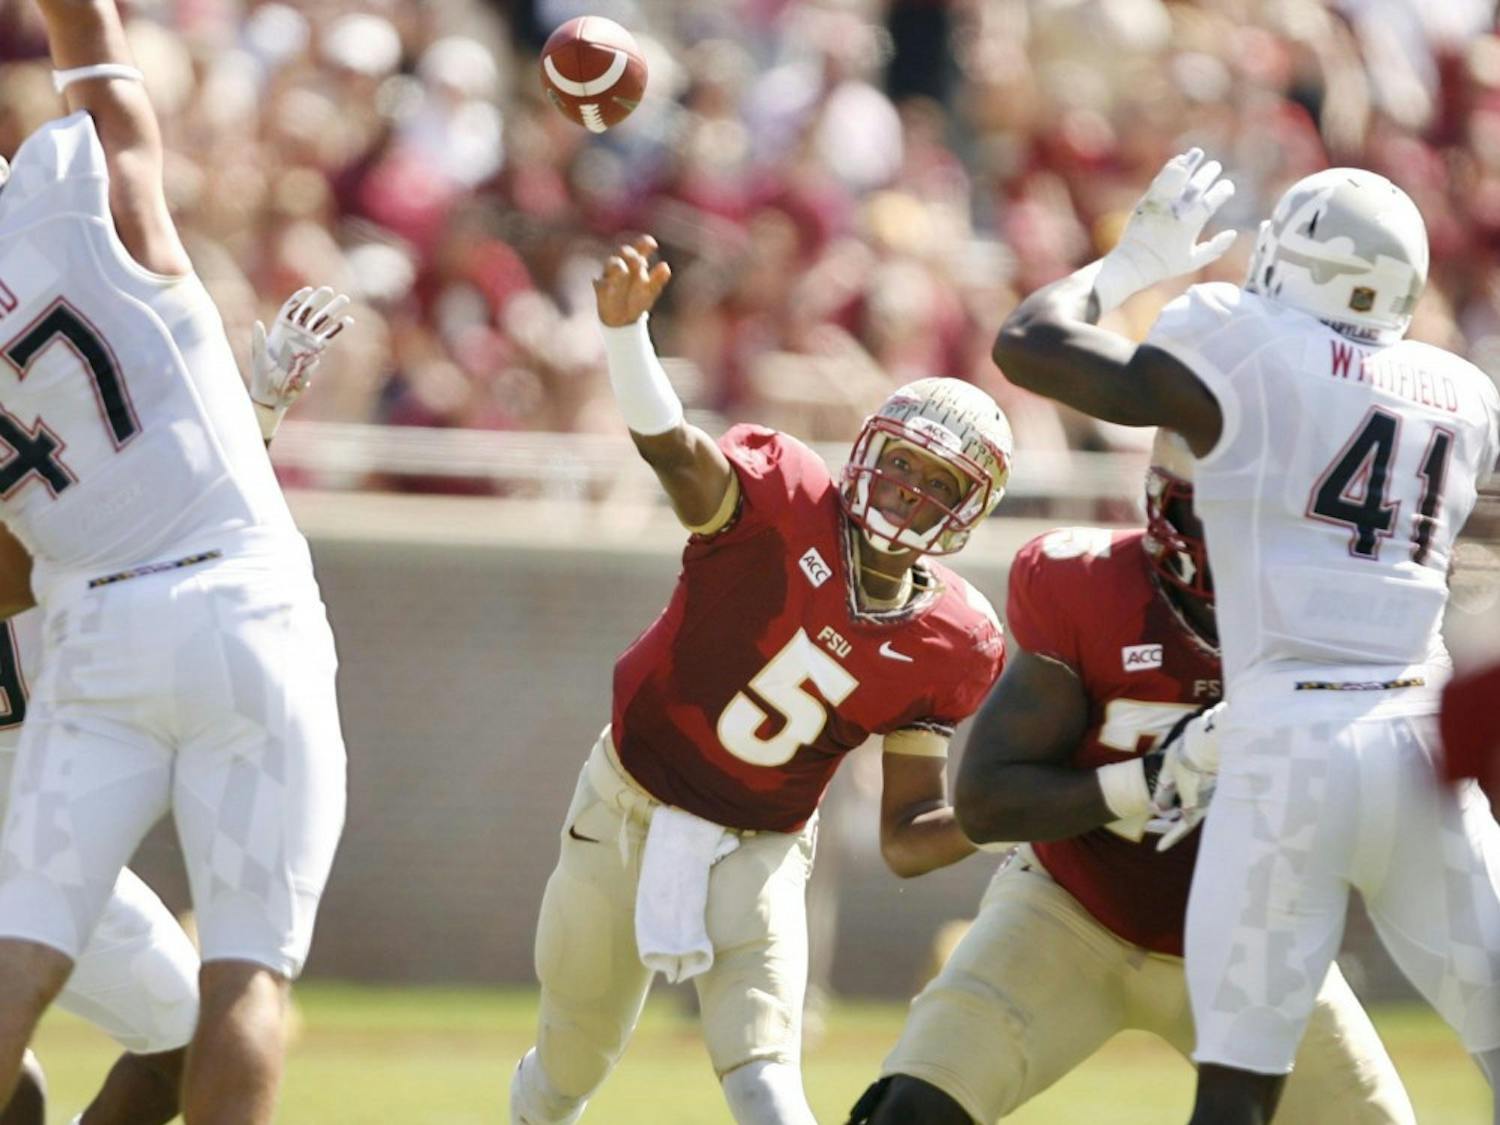 Florida State quarterback Jameis Winston throws against the Maryland defense at Doak Campbell Stadium in Talahasses, Florida, Saturday, October 5, 2013. FSU defeated Maryland, 63-0. (Stephen M. Dowell/Orlando Sentinel/MCT)